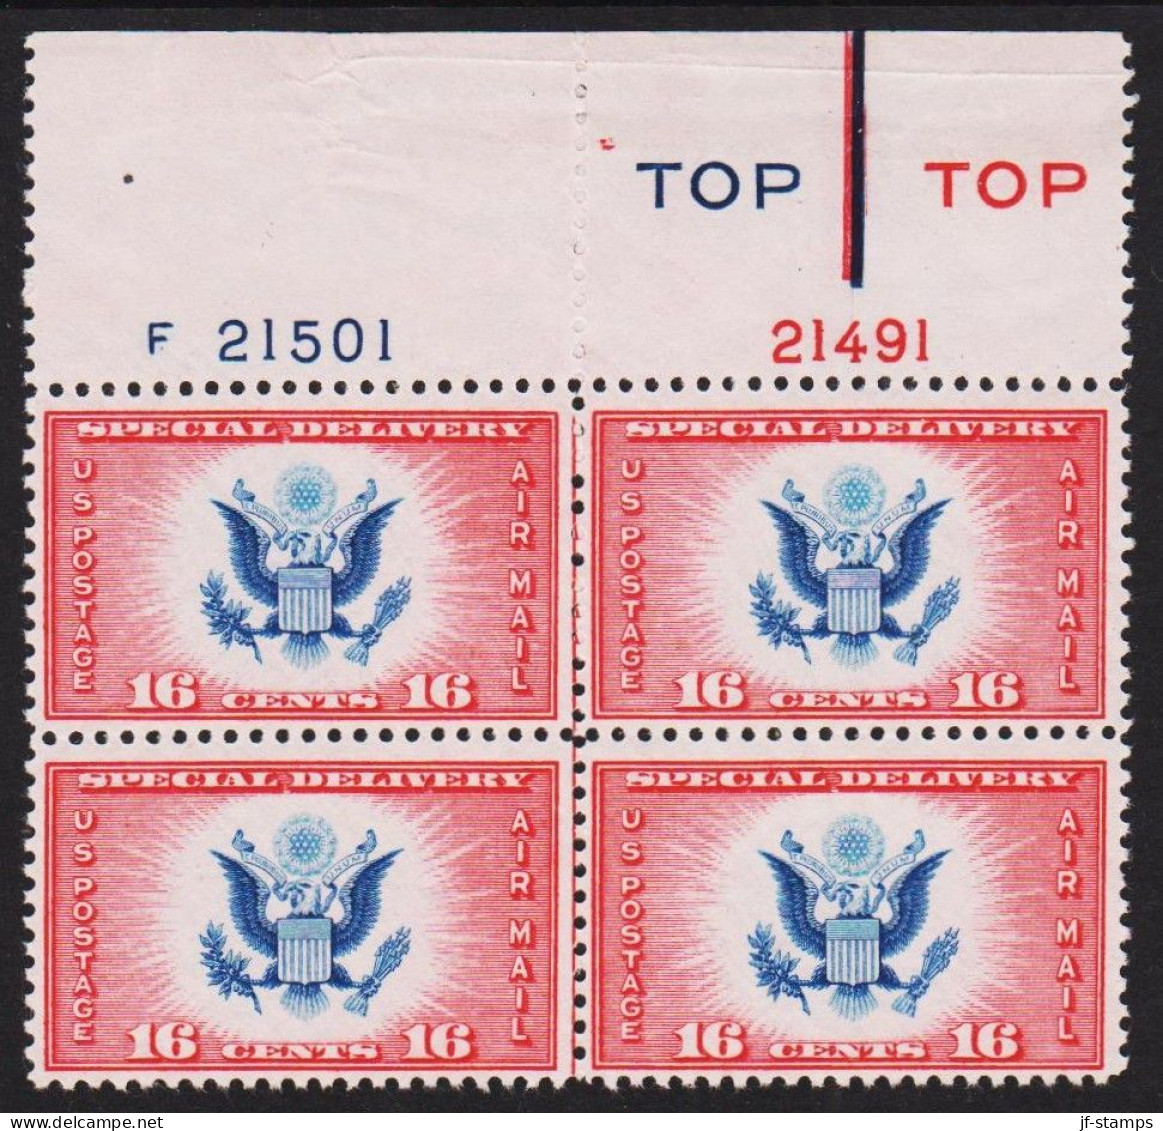 1936. USA. SPECIAL DELIVERY 16 CENTS 16. AIR MAIL, 4block Never Hinged.  Platenumber 21501 And 21491.  - JF542824 - Ongebruikt